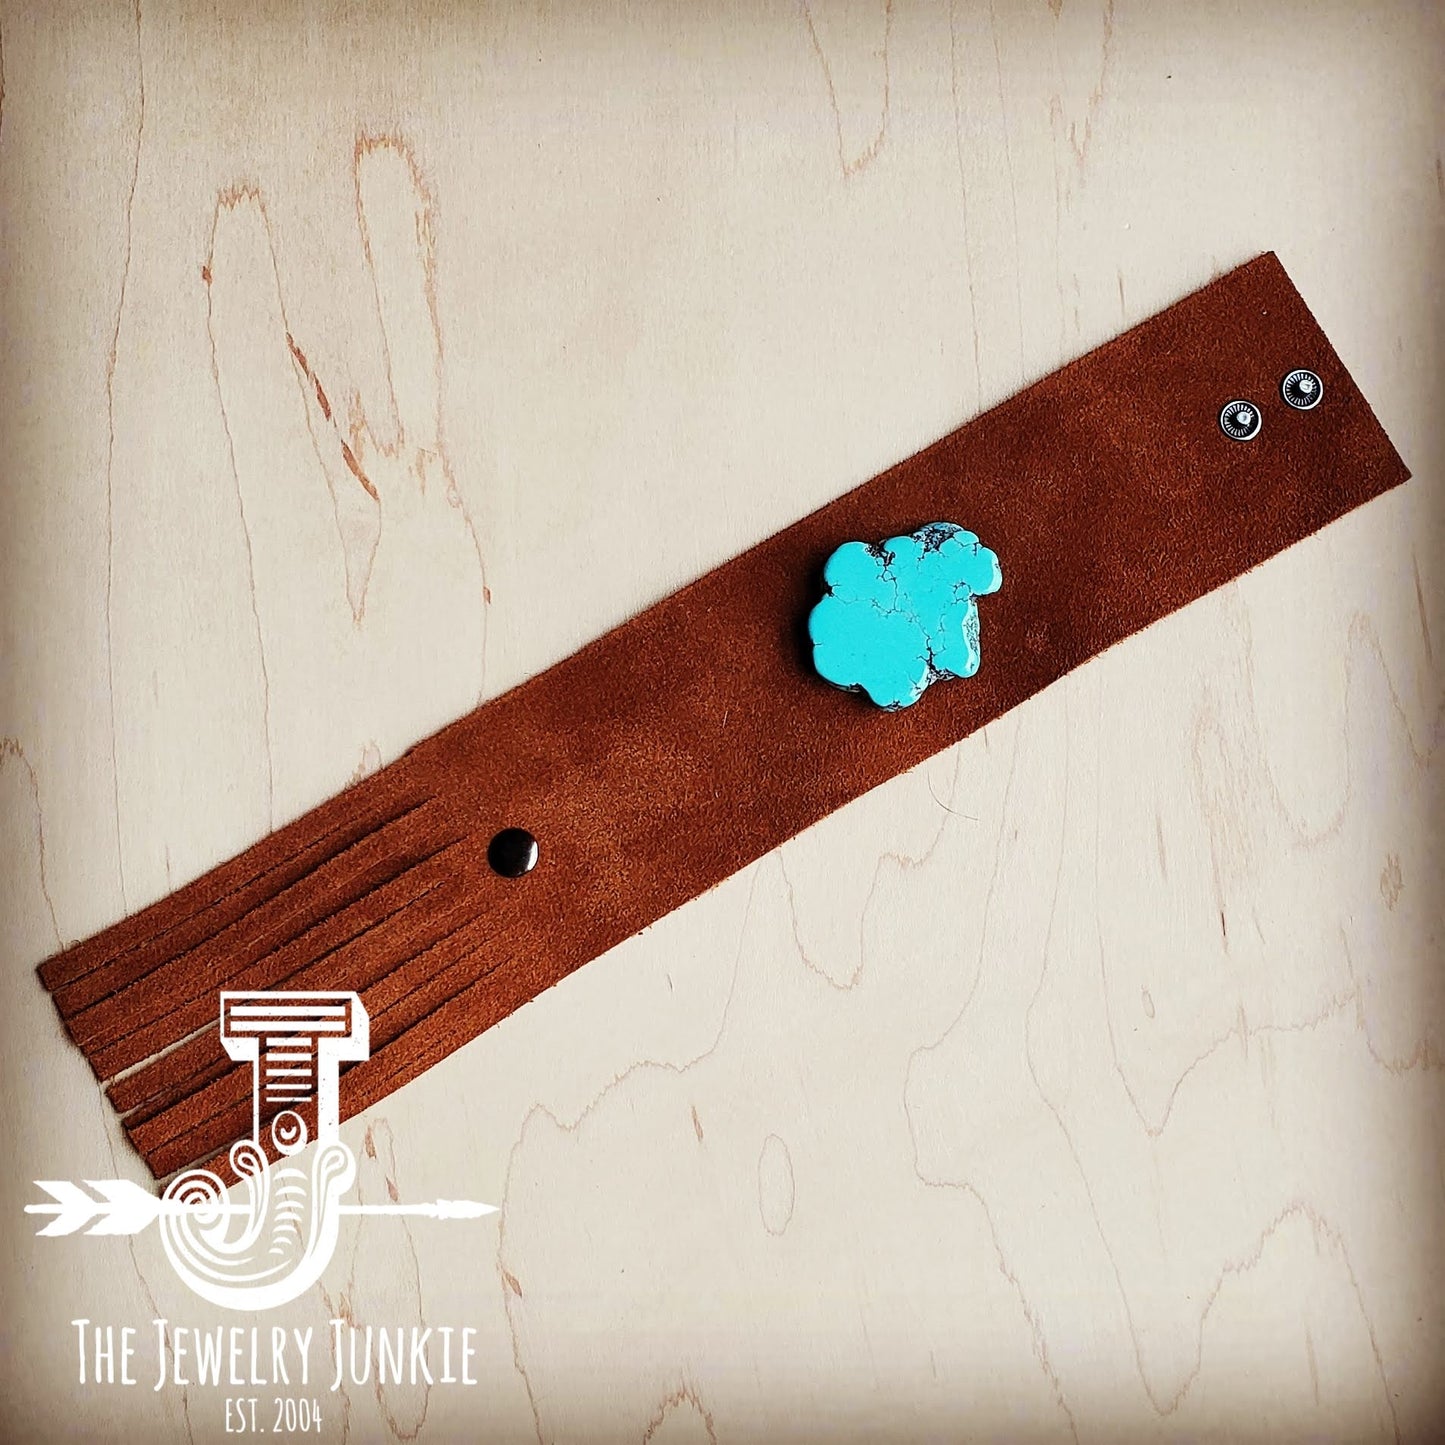 Tan Suede Leather Cuff w/ Fringe and Turquoise Slab (002o)